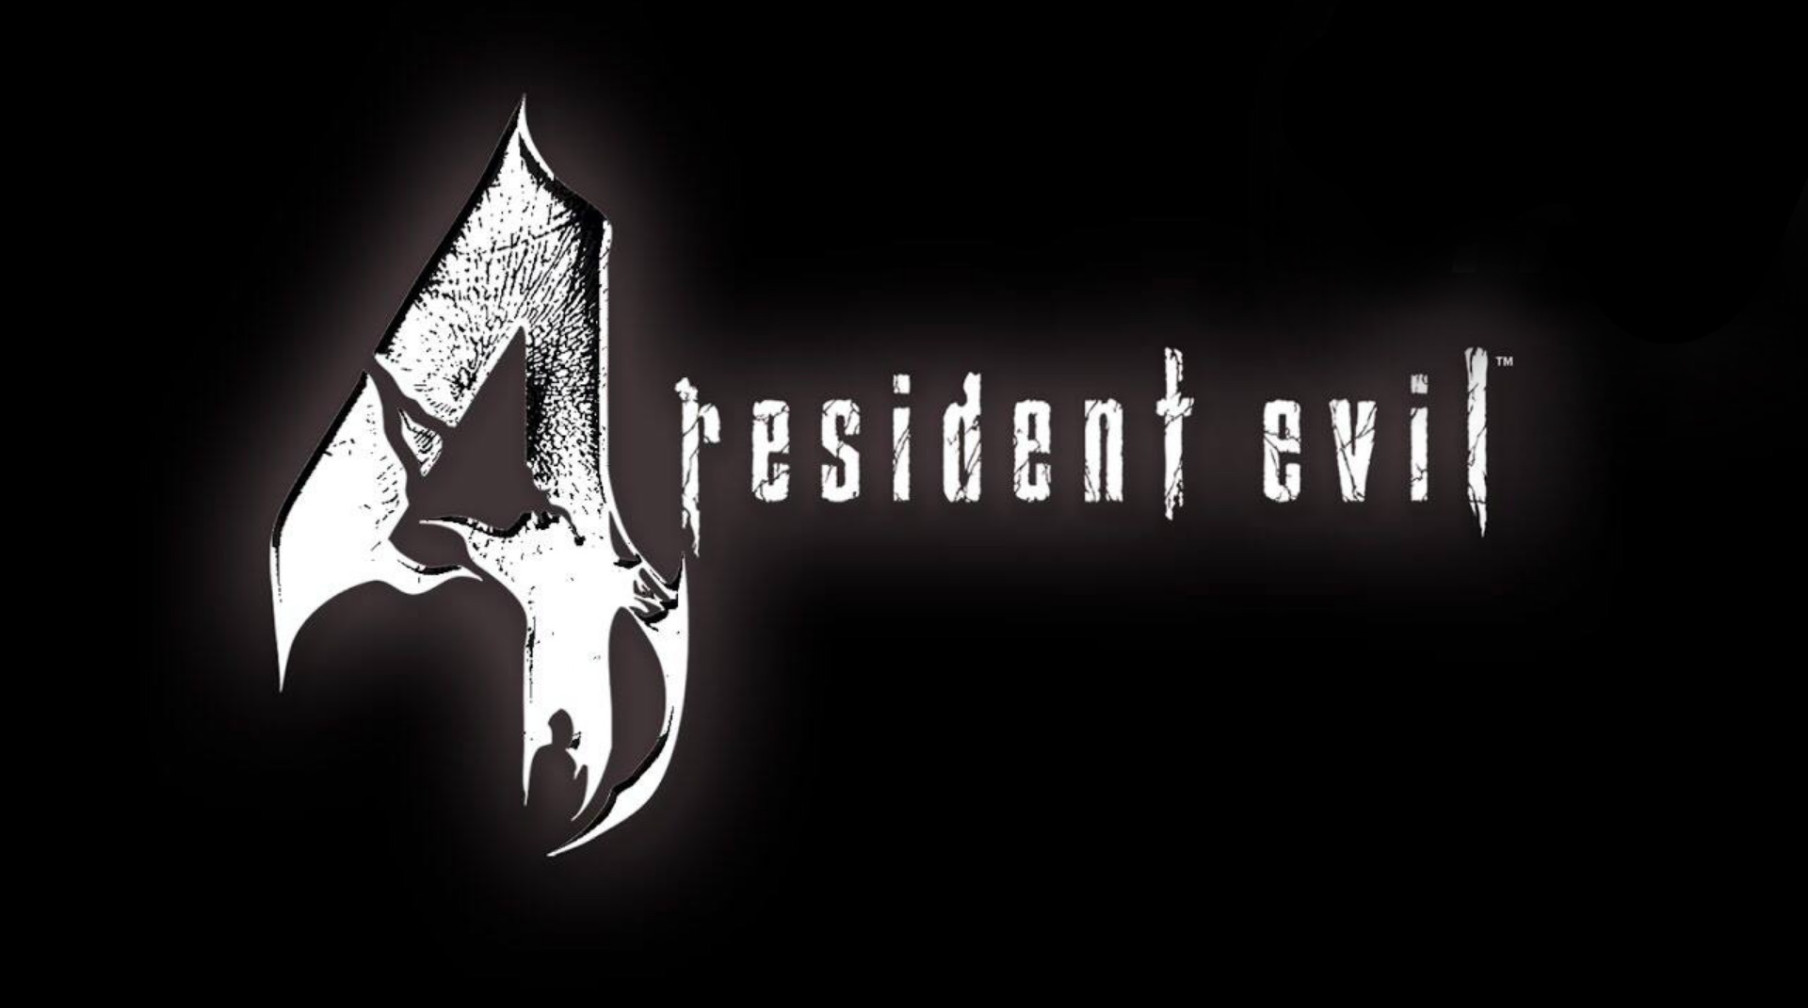 Steam resident evil 4 ultimate hd фото 54